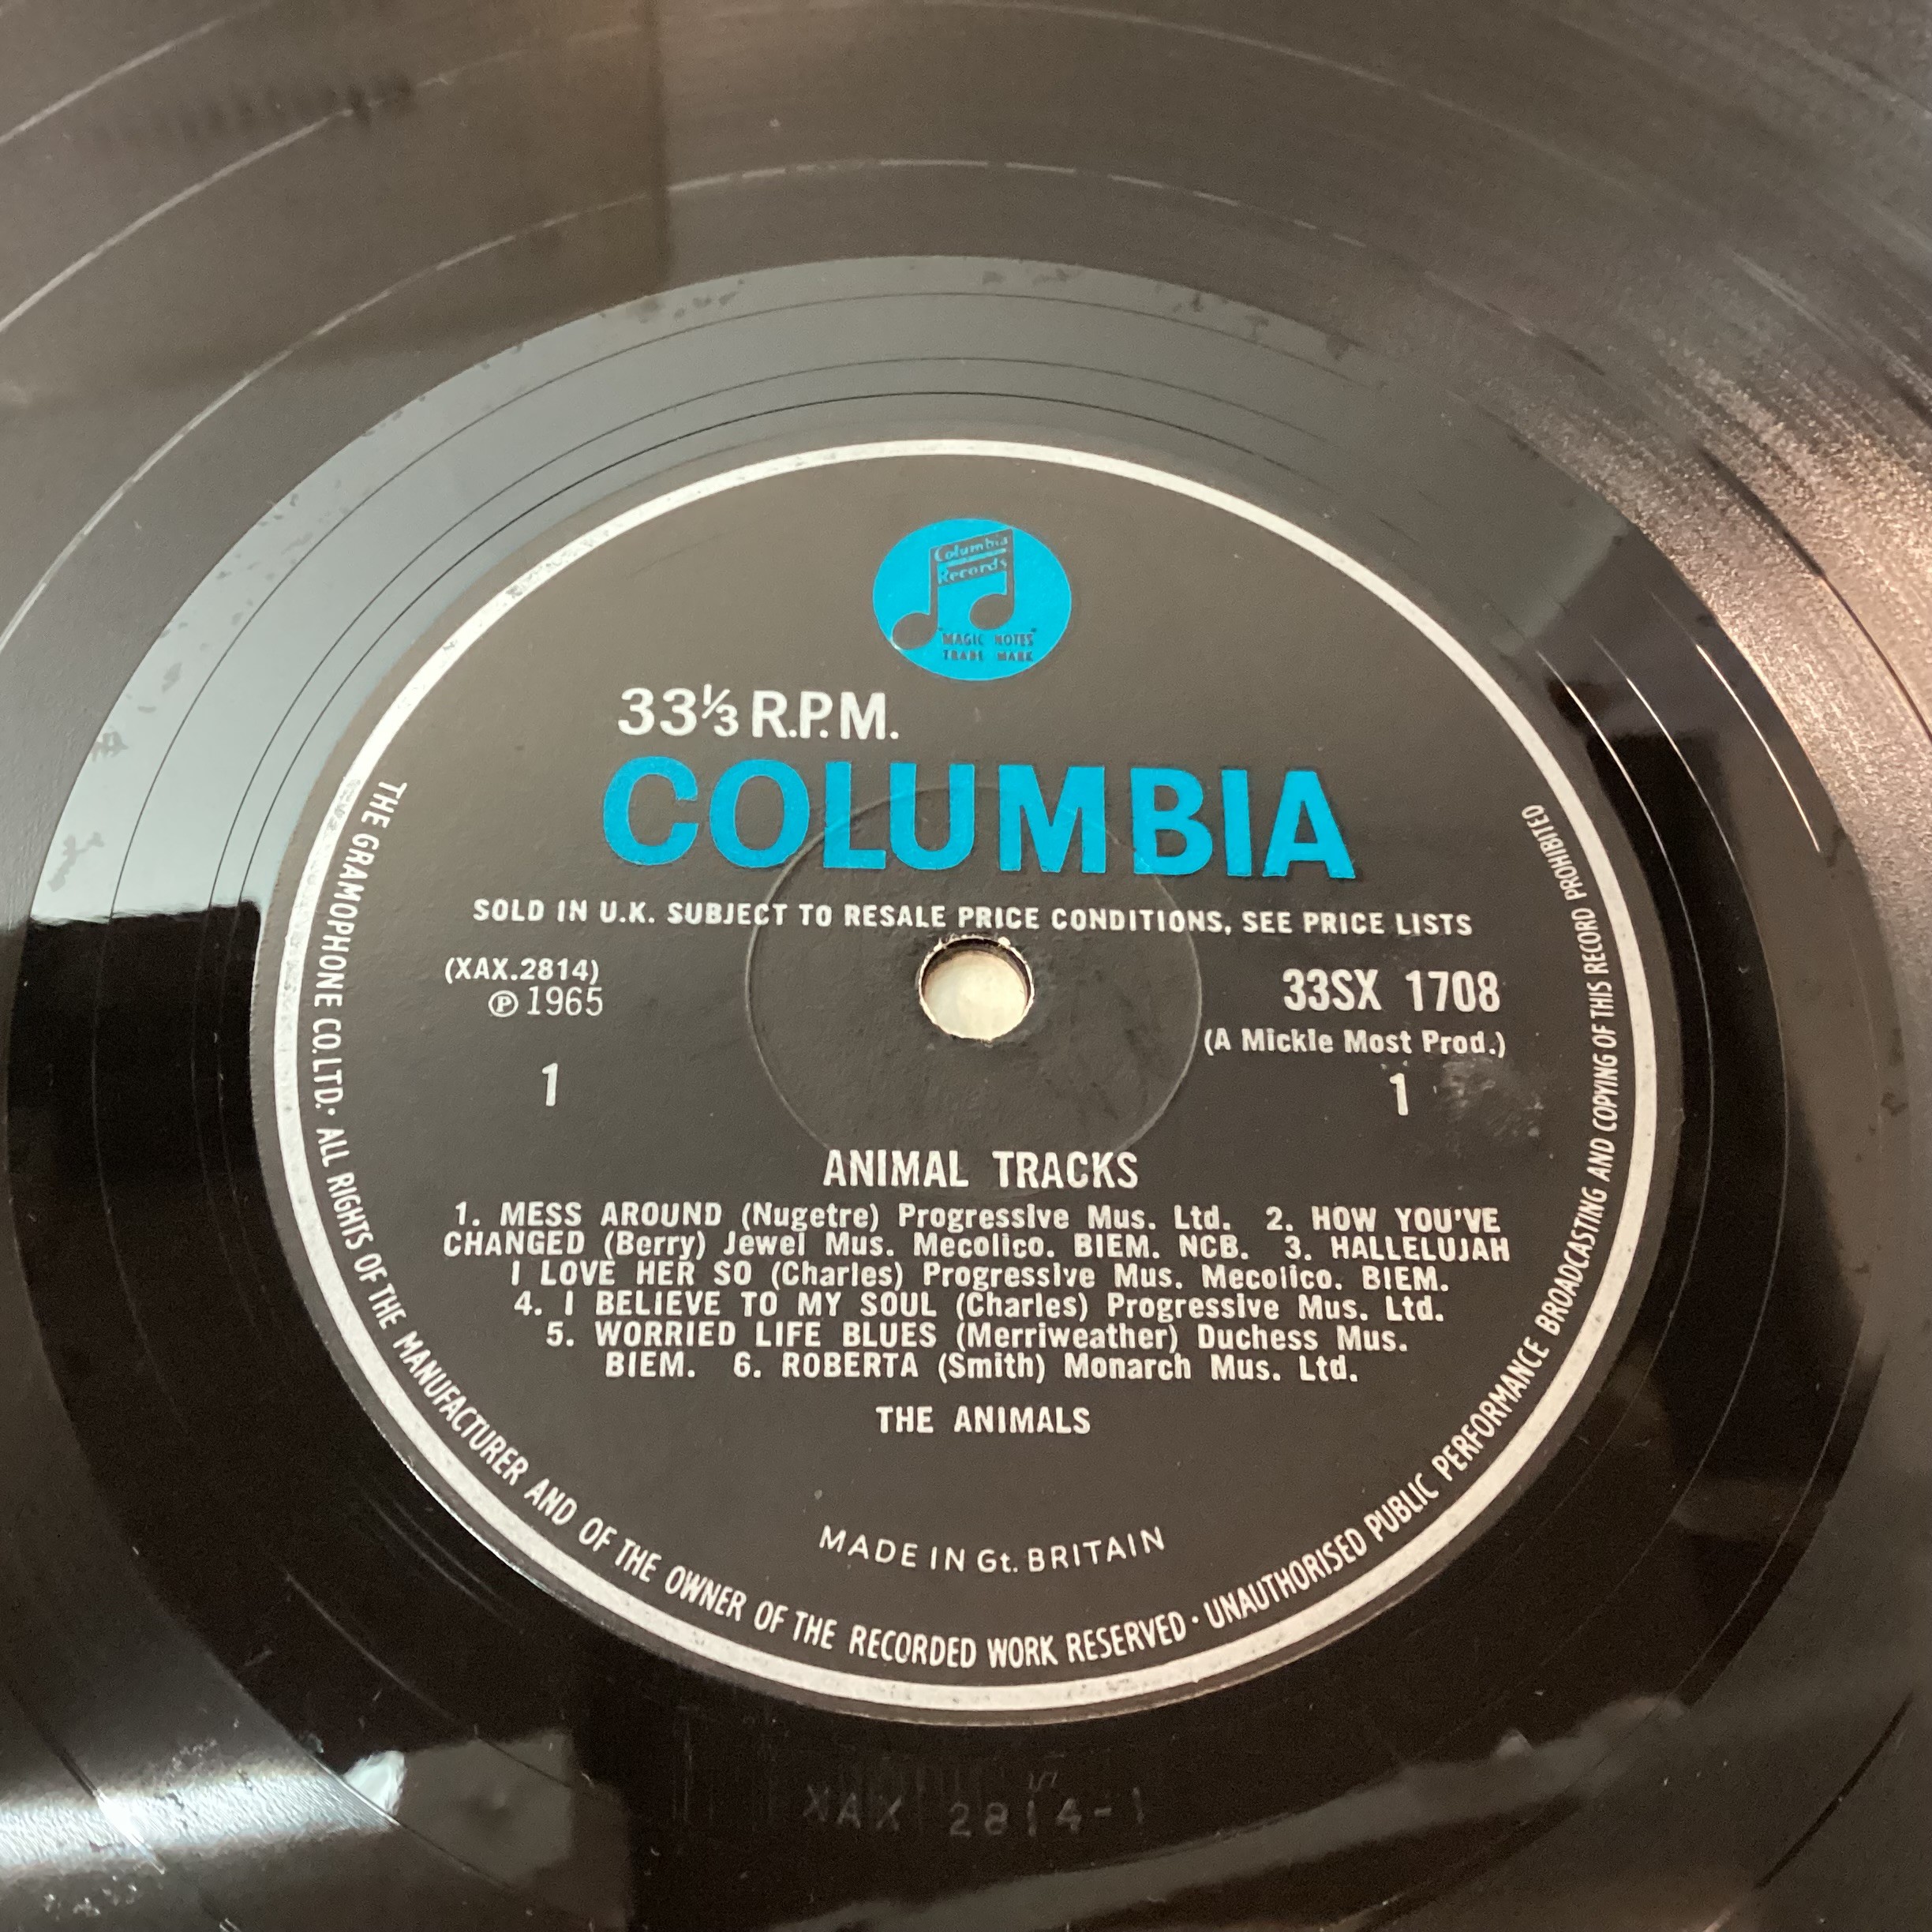 THE ANIMALS VINYL ALBUM ‘ANIMAL TRACKS’. This album is found on the Columbia 33SX 1708 from 1965 and - Image 4 of 4